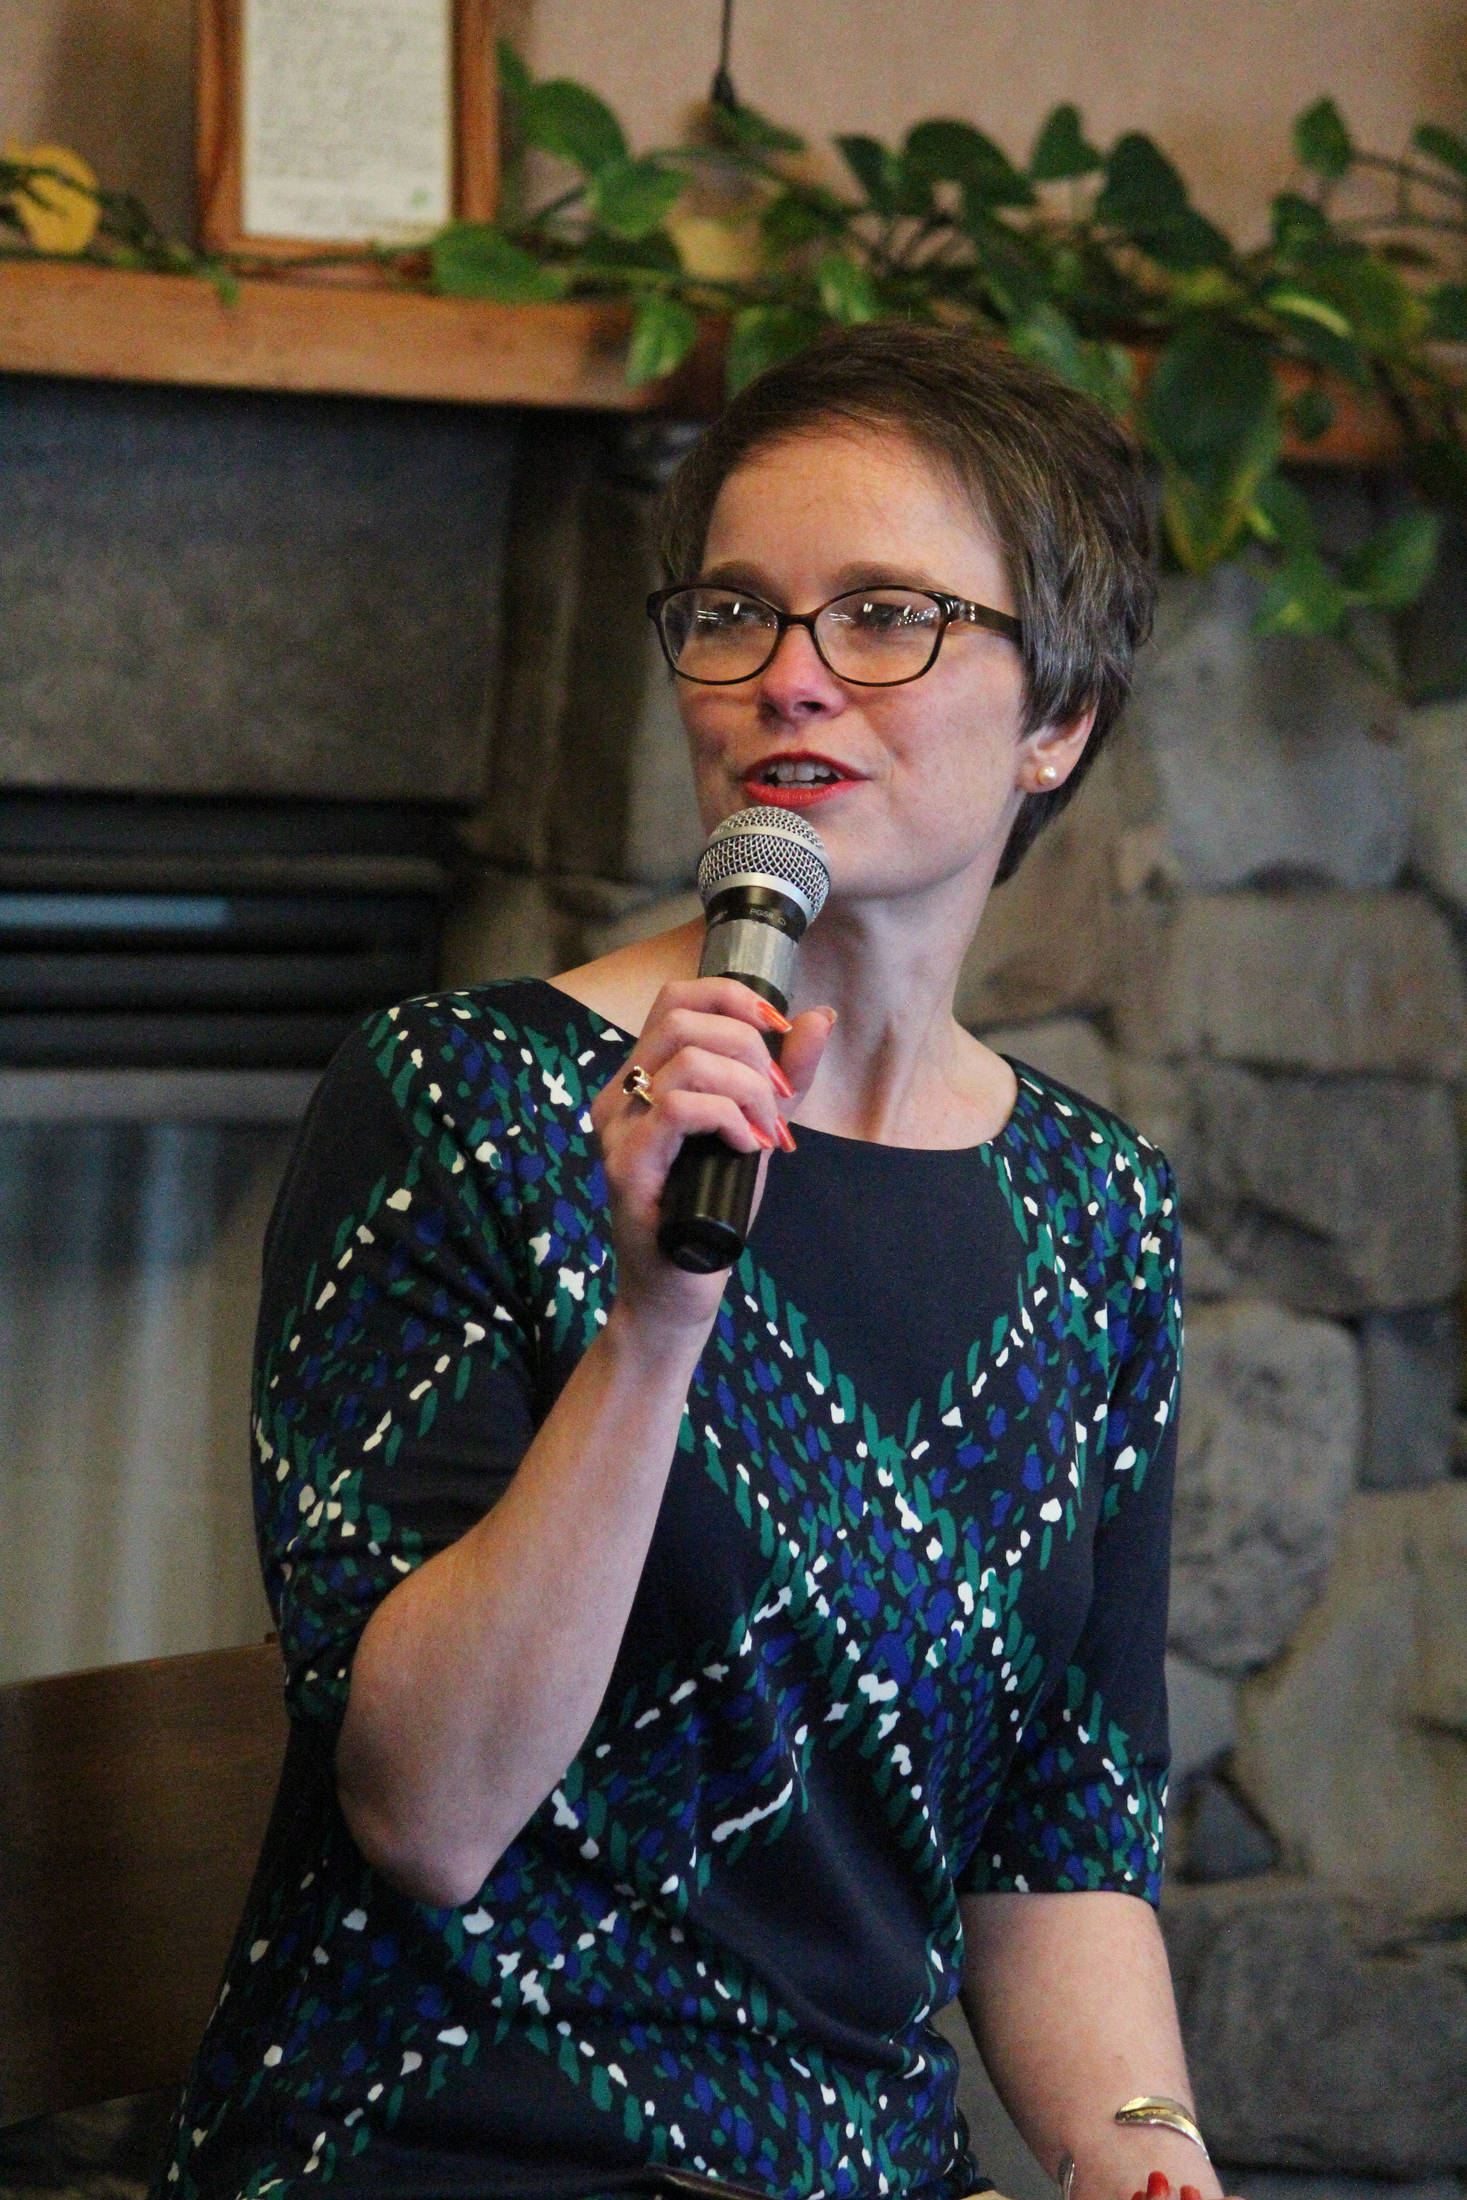 Sarah Vance, a Republican candidate for the Alaska House of Representatives District 31 seat, speaks at a candidate forum Saturday, Oct. 20, 2018 at the Homer Public Library in Homer, Alaska. Vance will face incumbent Rep. Paul Seaton in the November election. (Photo by Megan Pacer/Homer News)